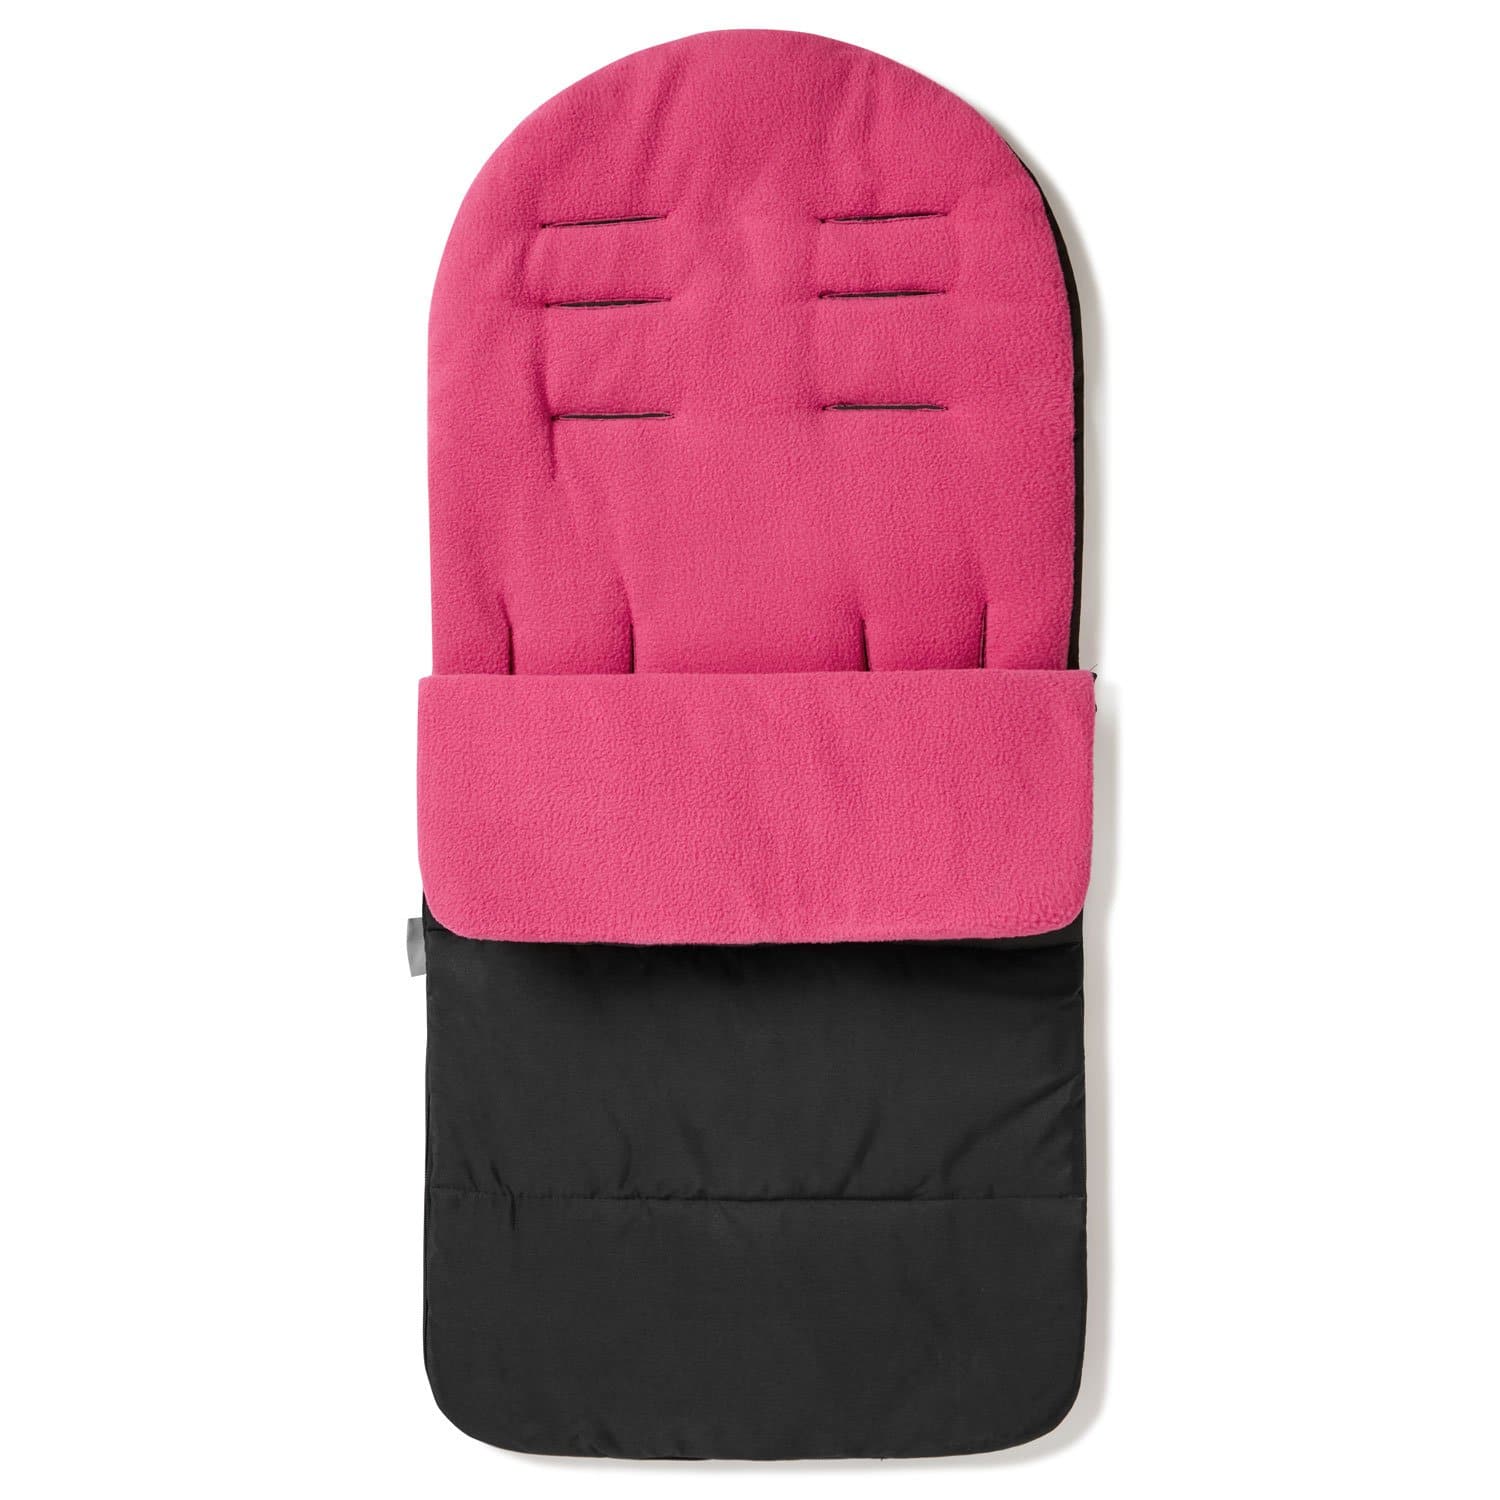 Premium Footmuff / Cosy Toes Compatible with Norton - Pink Rose / Fits All Models | For Your Little One